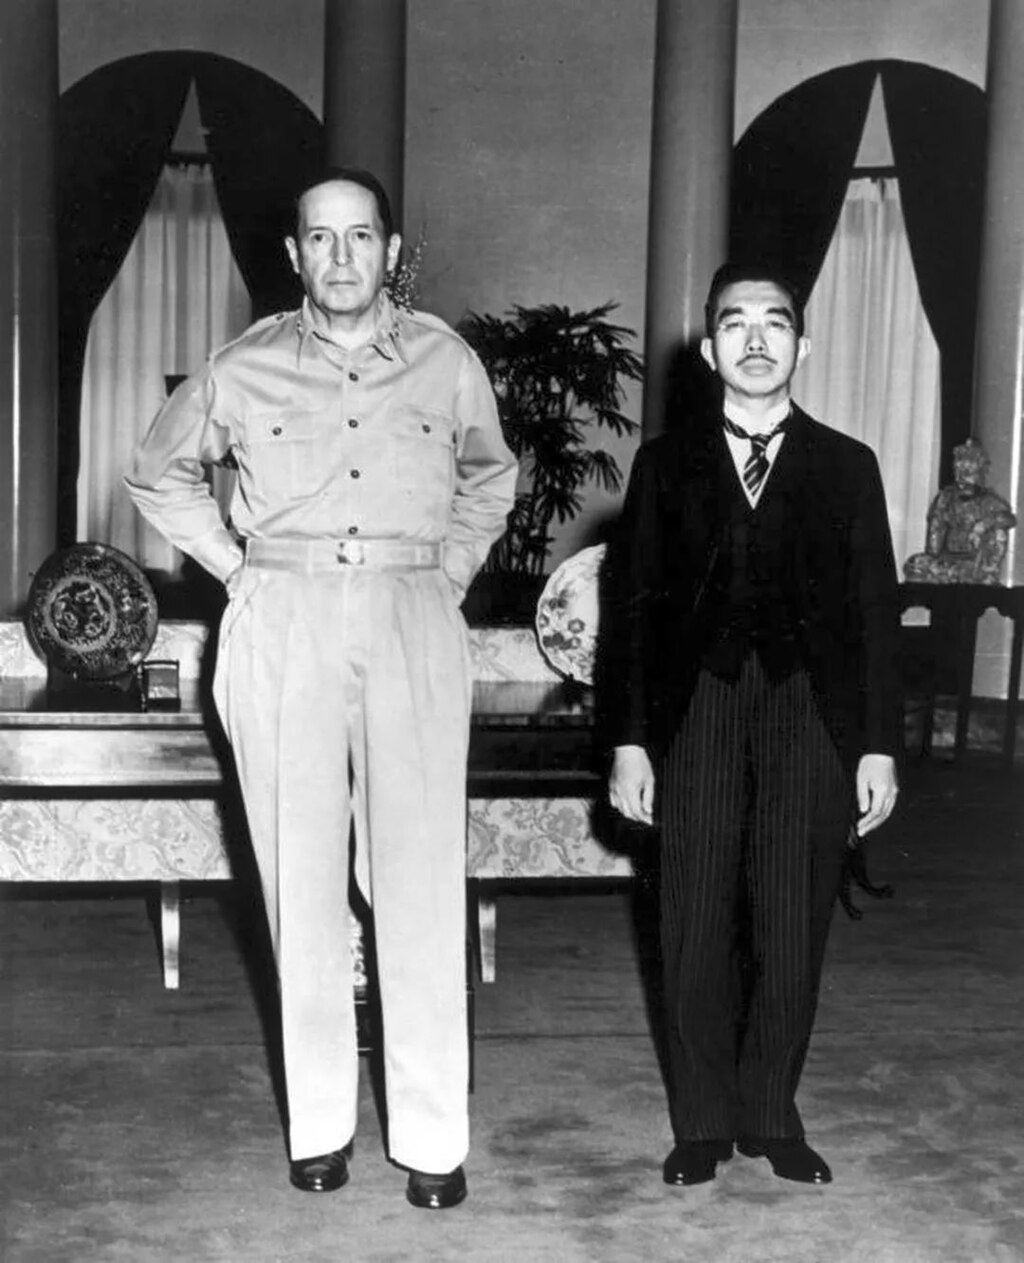 Emperor Hirohito and General MacArthur, at their first meeting